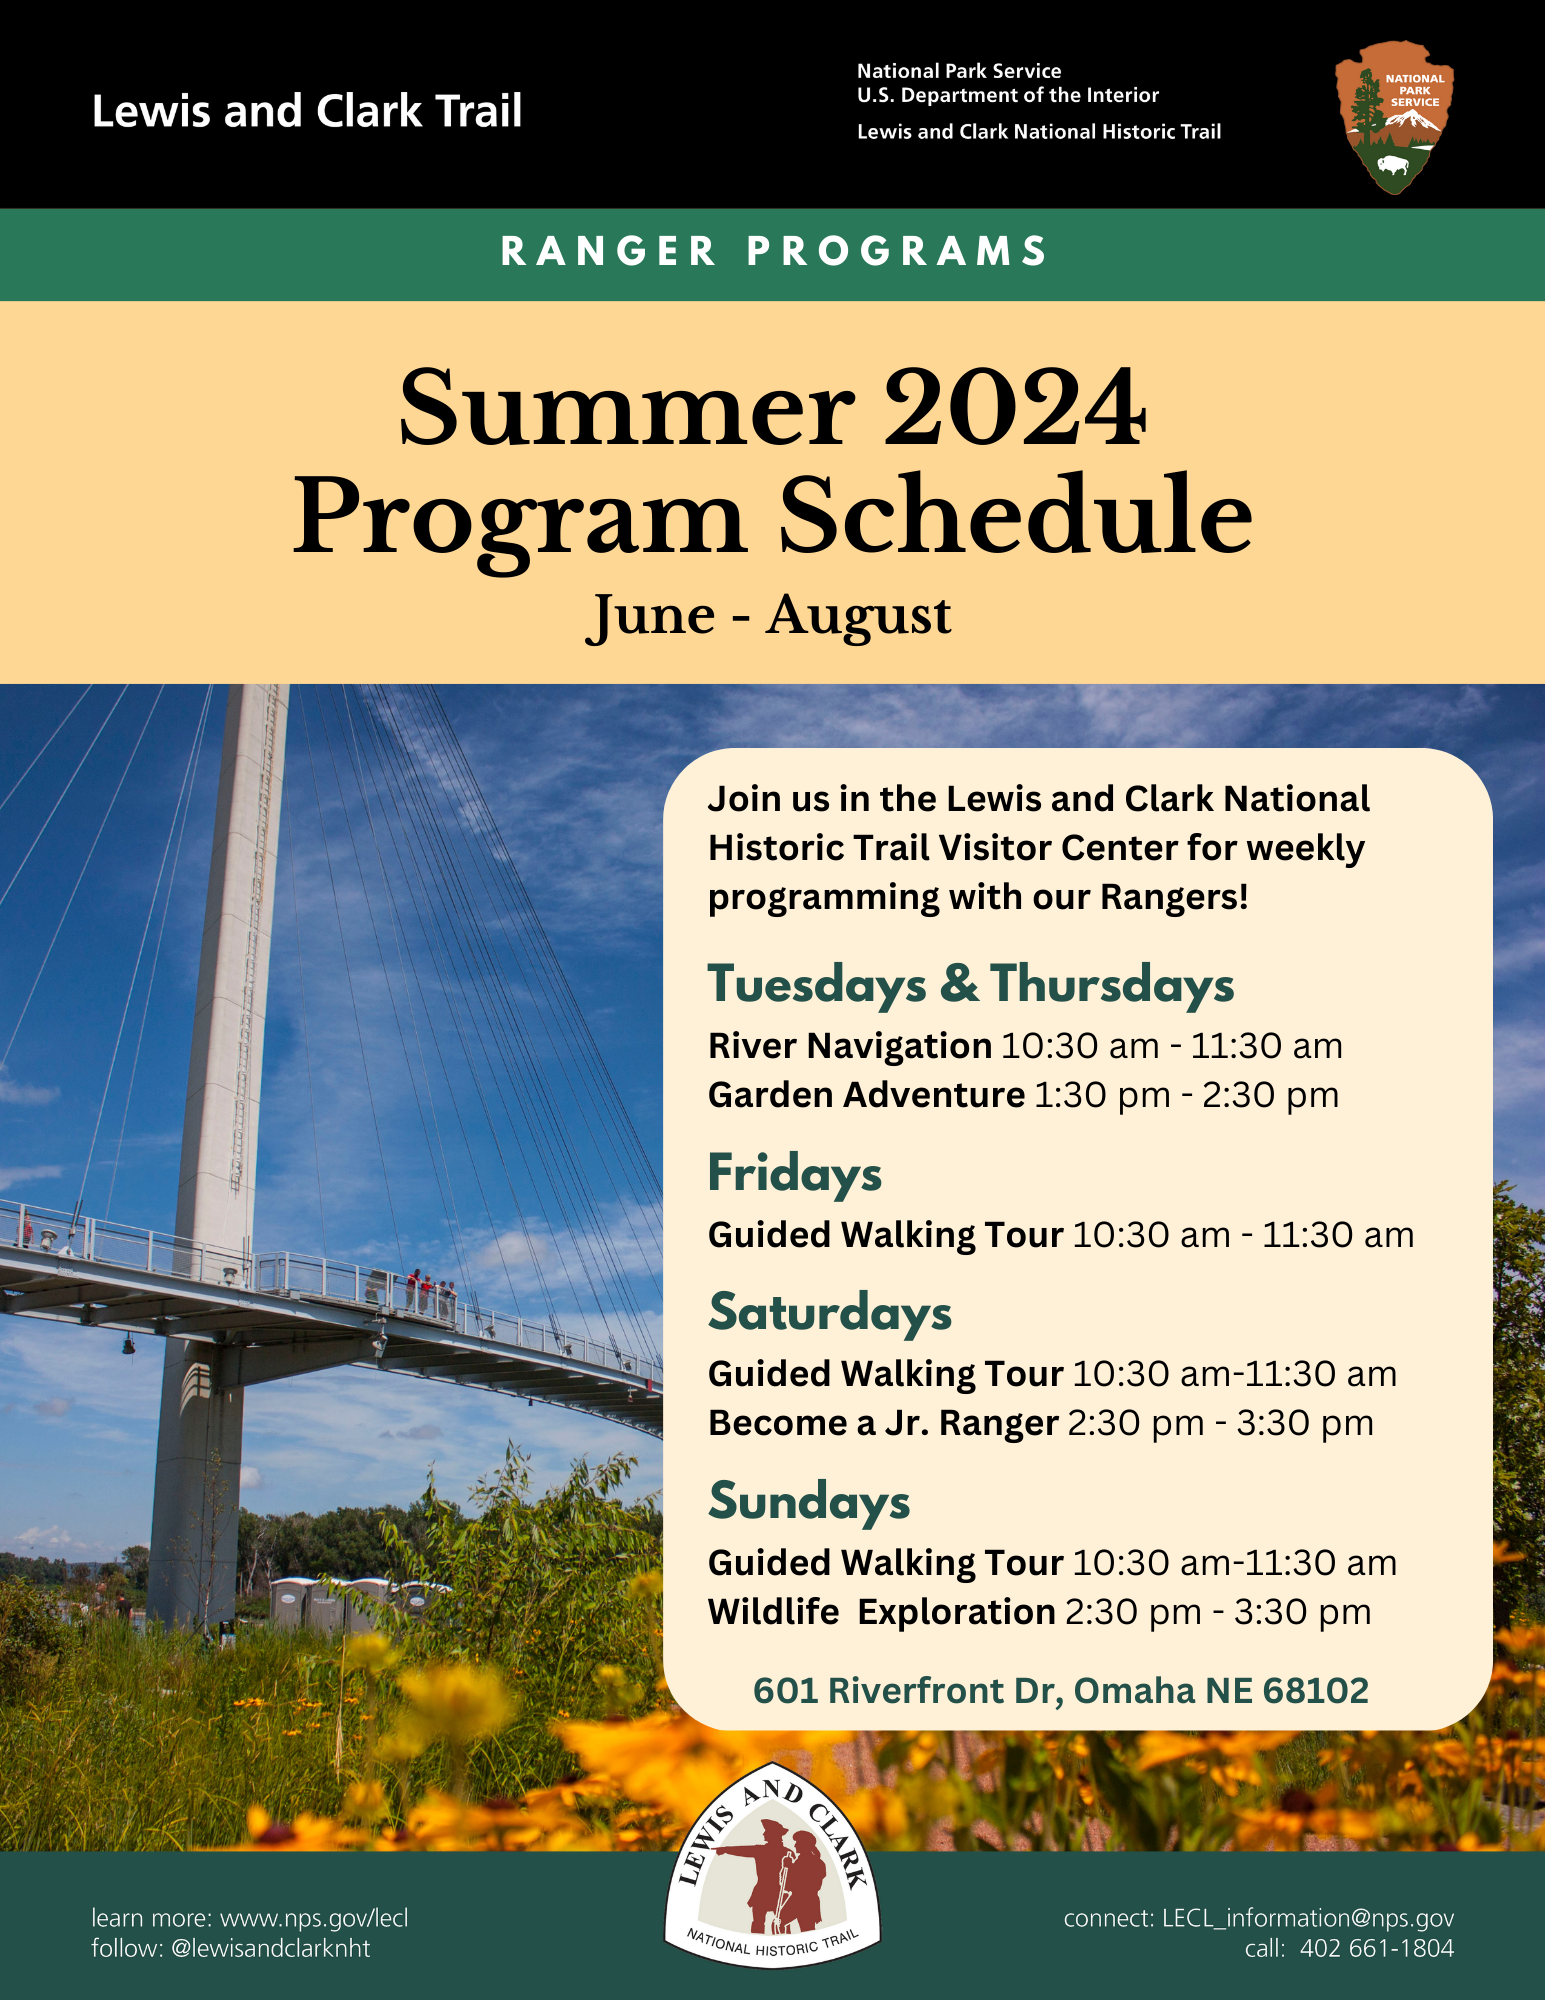 Join us in the Lewis and Clark National Historic Trail Visitor Center for weekly programming with our Rangers! Tuesdays & Thursdays River Navigation 10:30 am - 11:30 am Garden Adventure 1:30 pm - 2:30 pm Fridays Guided Walking Tour 10:30 am - 11:30 am Sat